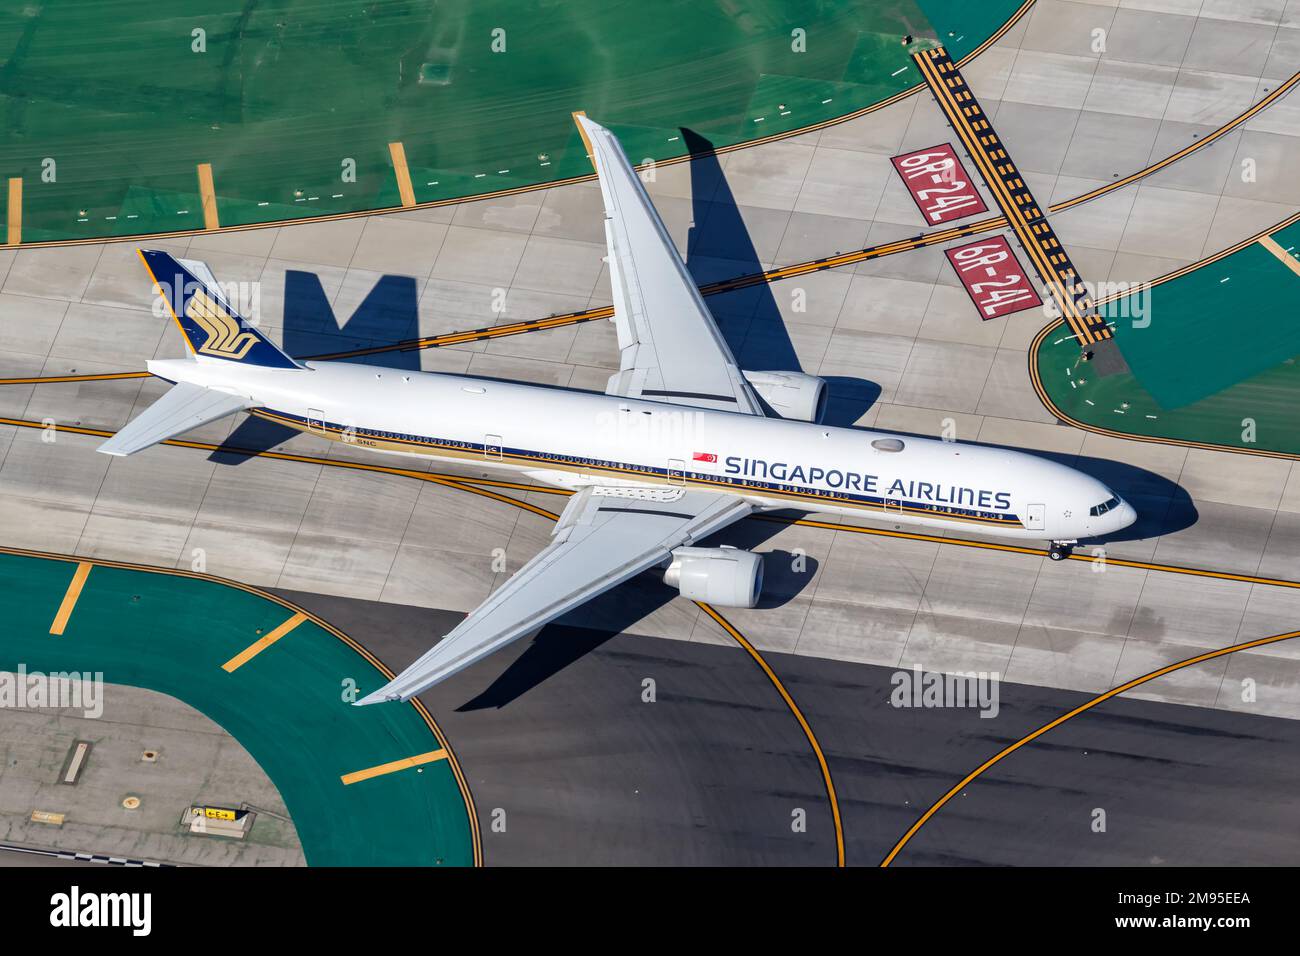 Los Angeles, United States - November 4, 2022: Singapore Airlines Boeing 777-300(ER) airplane at Los Angeles airport (LAX) in the United States aerial Stock Photo